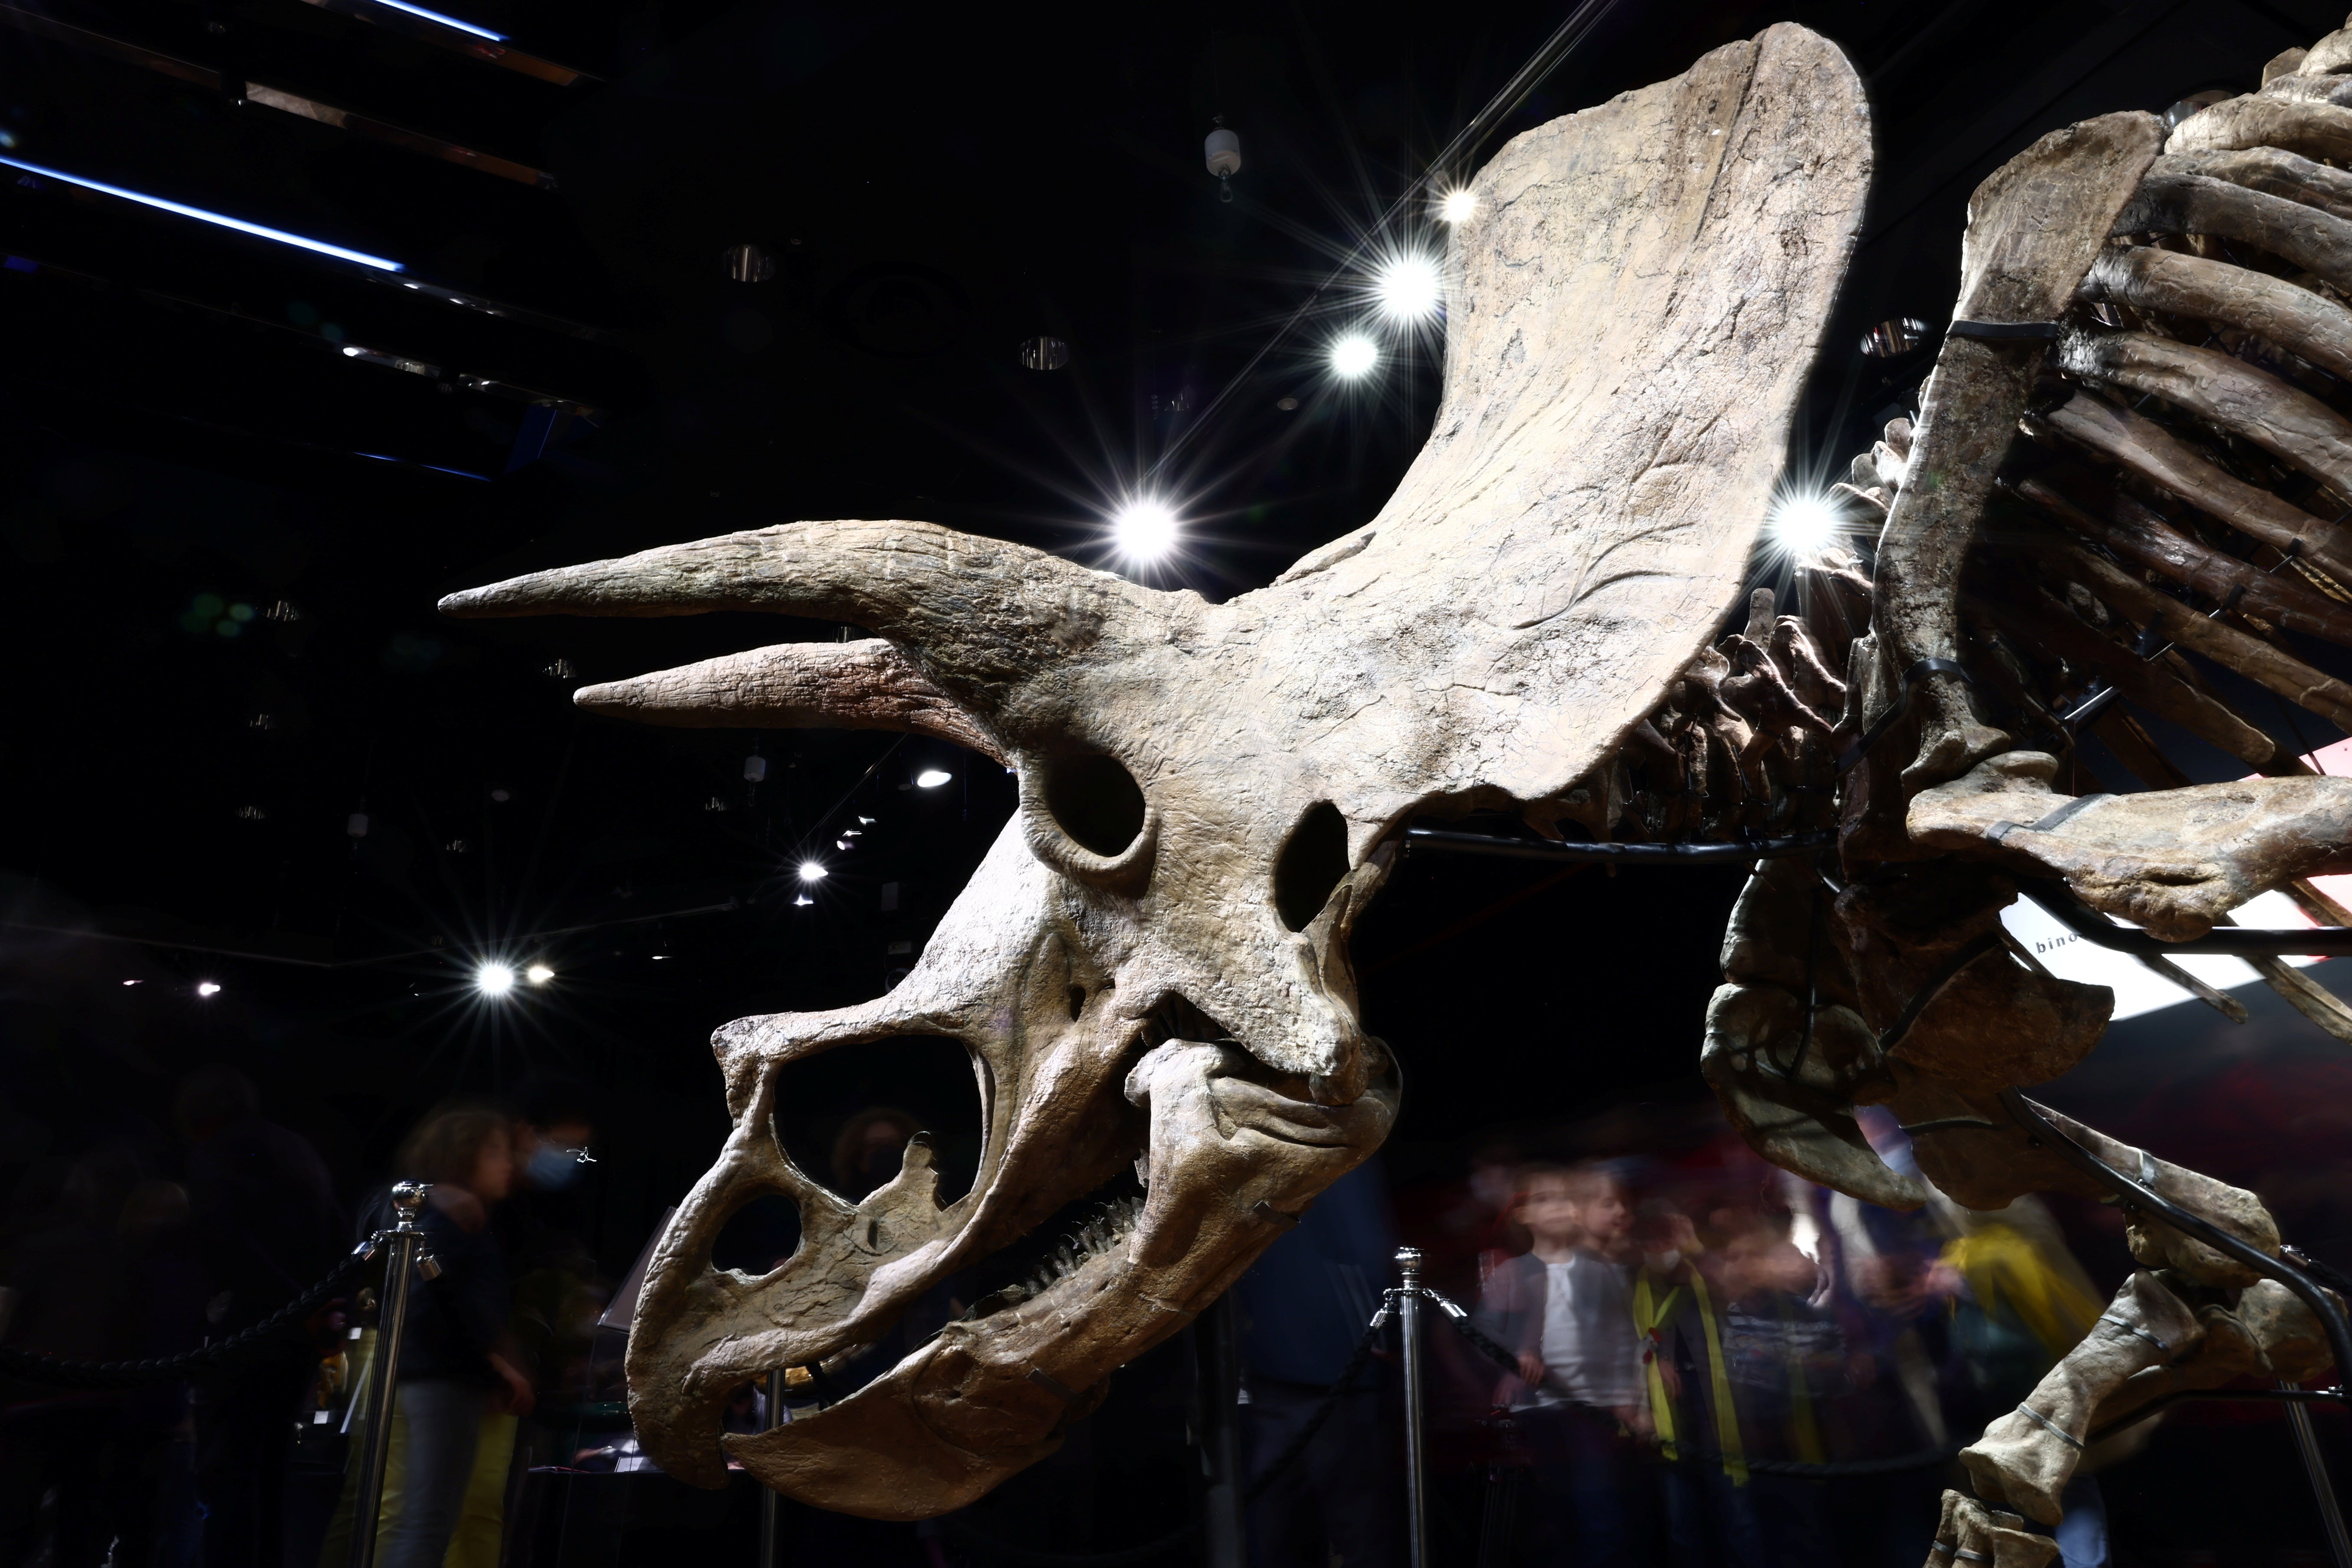 The skeleton of ‘Big John’, a gigantic Triceratops over 66 million years old, seen on display